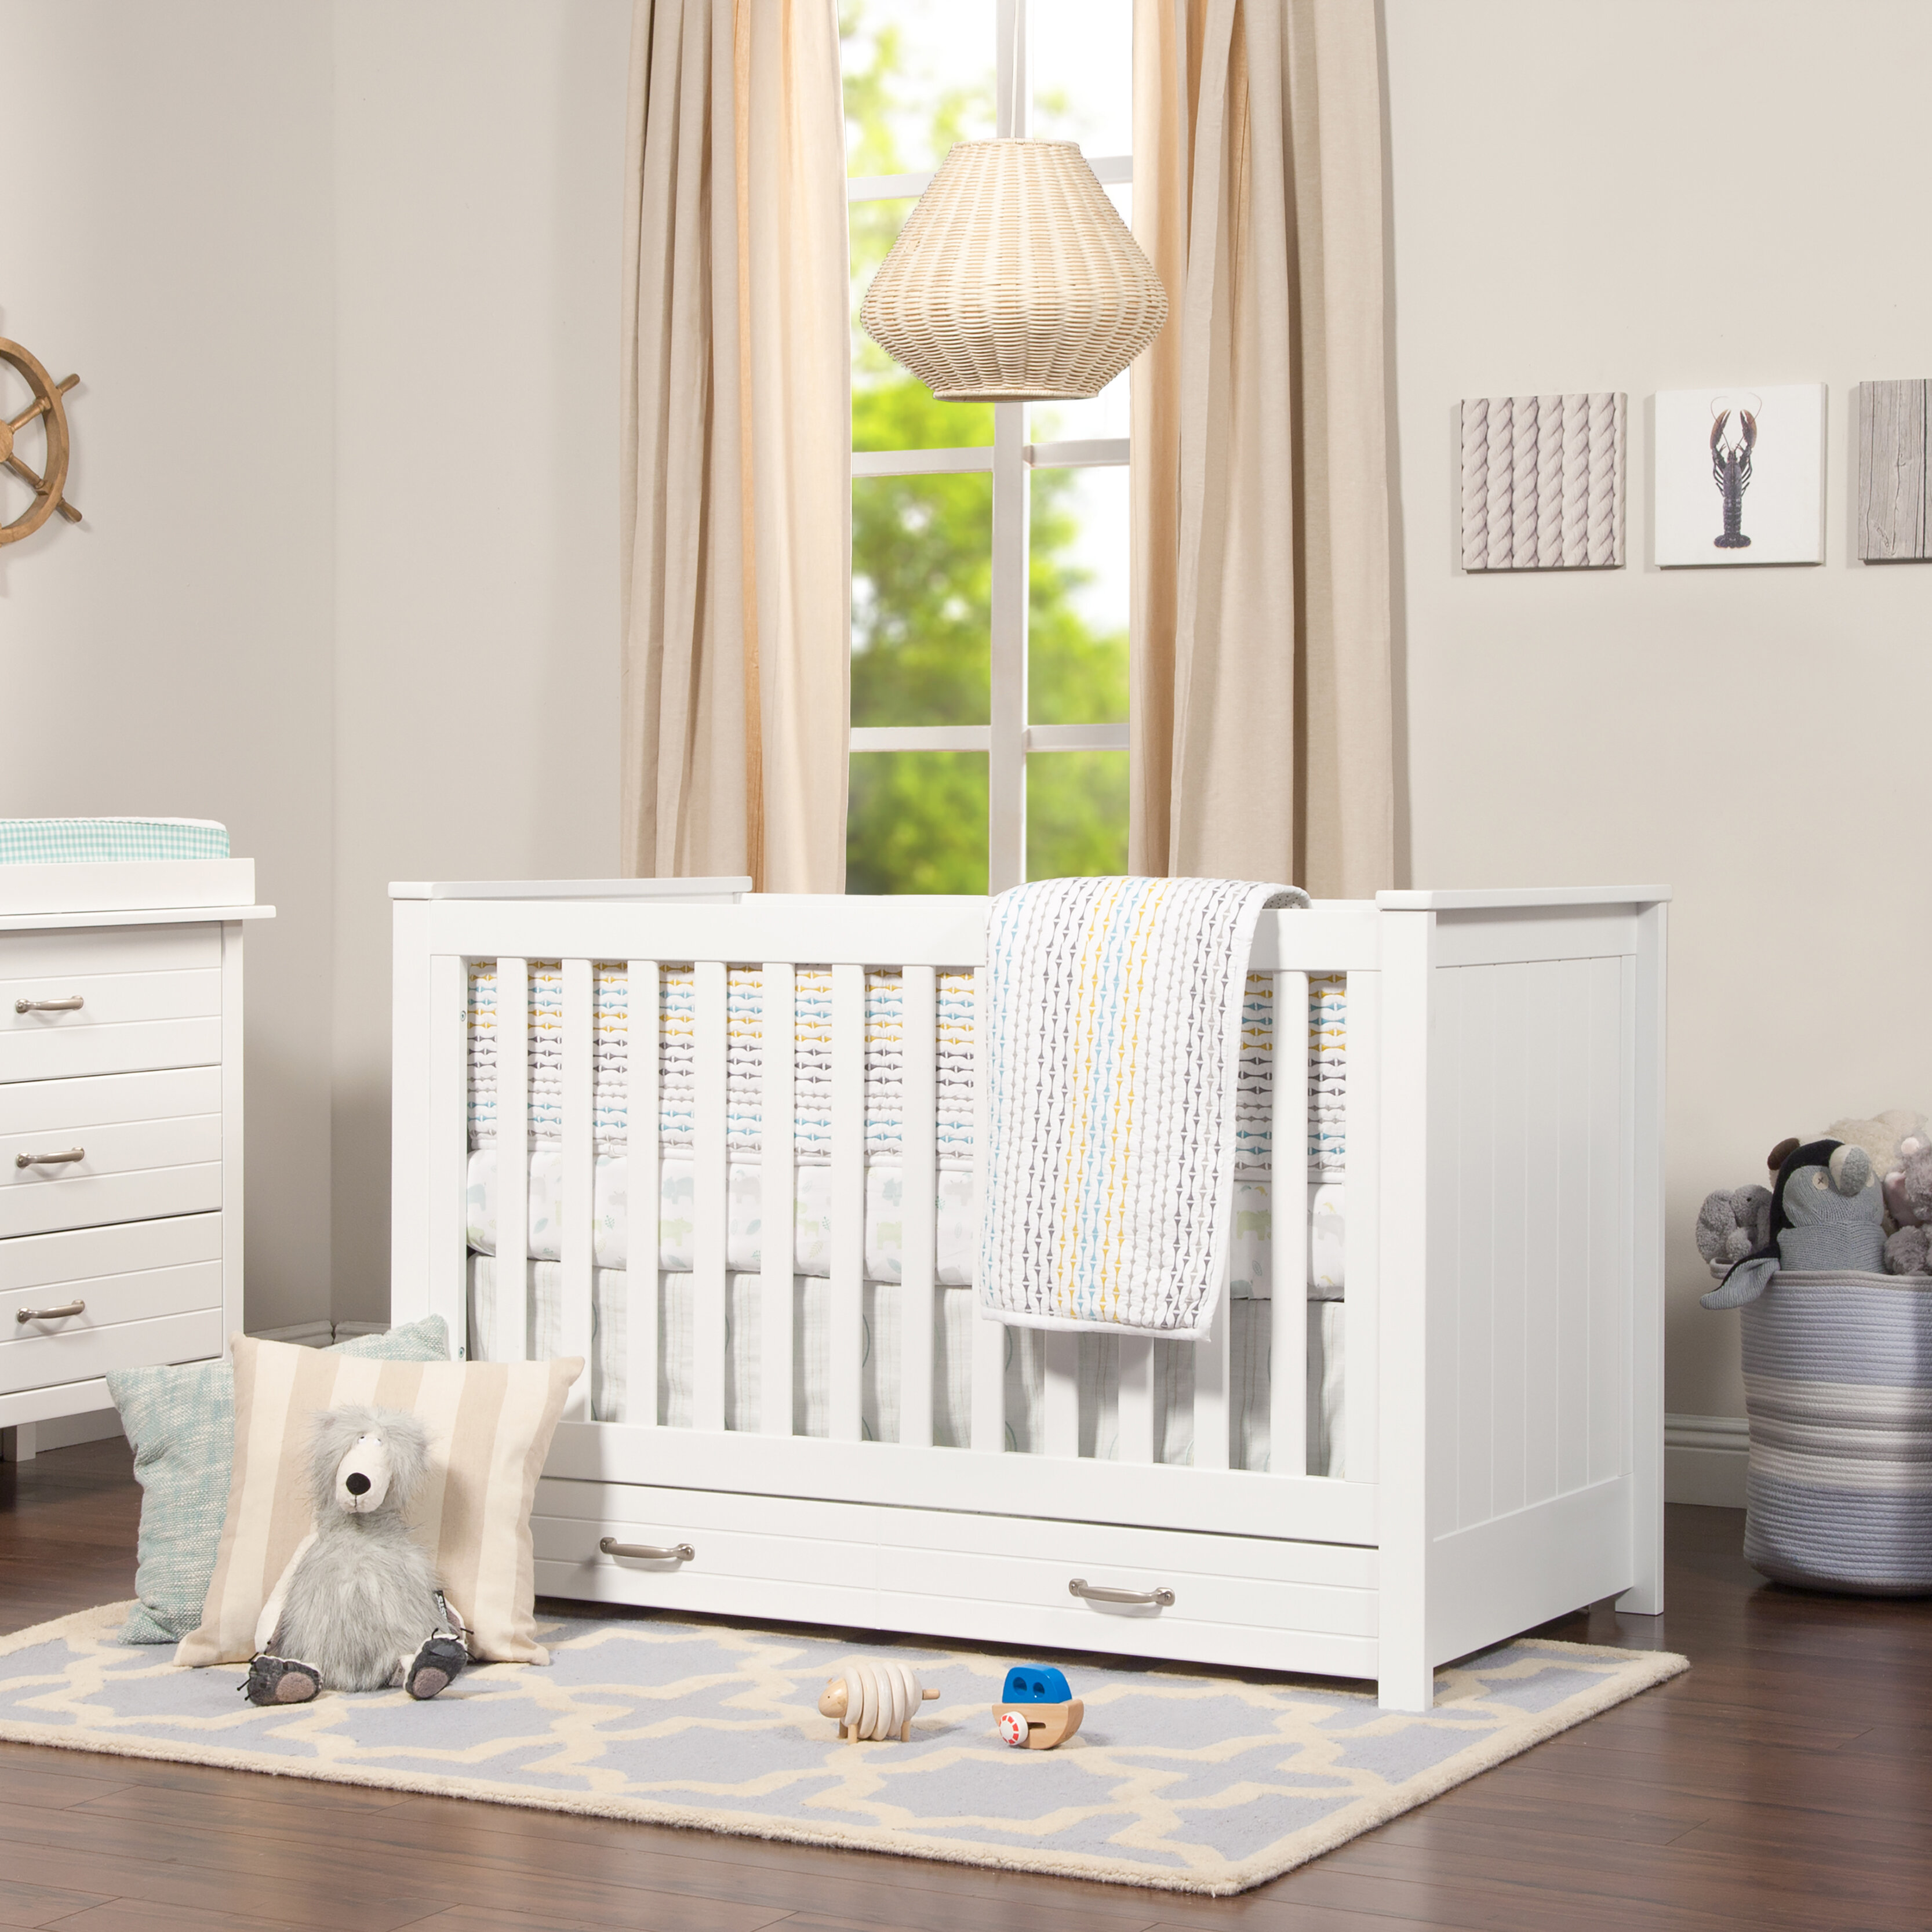 Asher 3 In 1 Convertible Crib And Storage Reviews Birch Lane